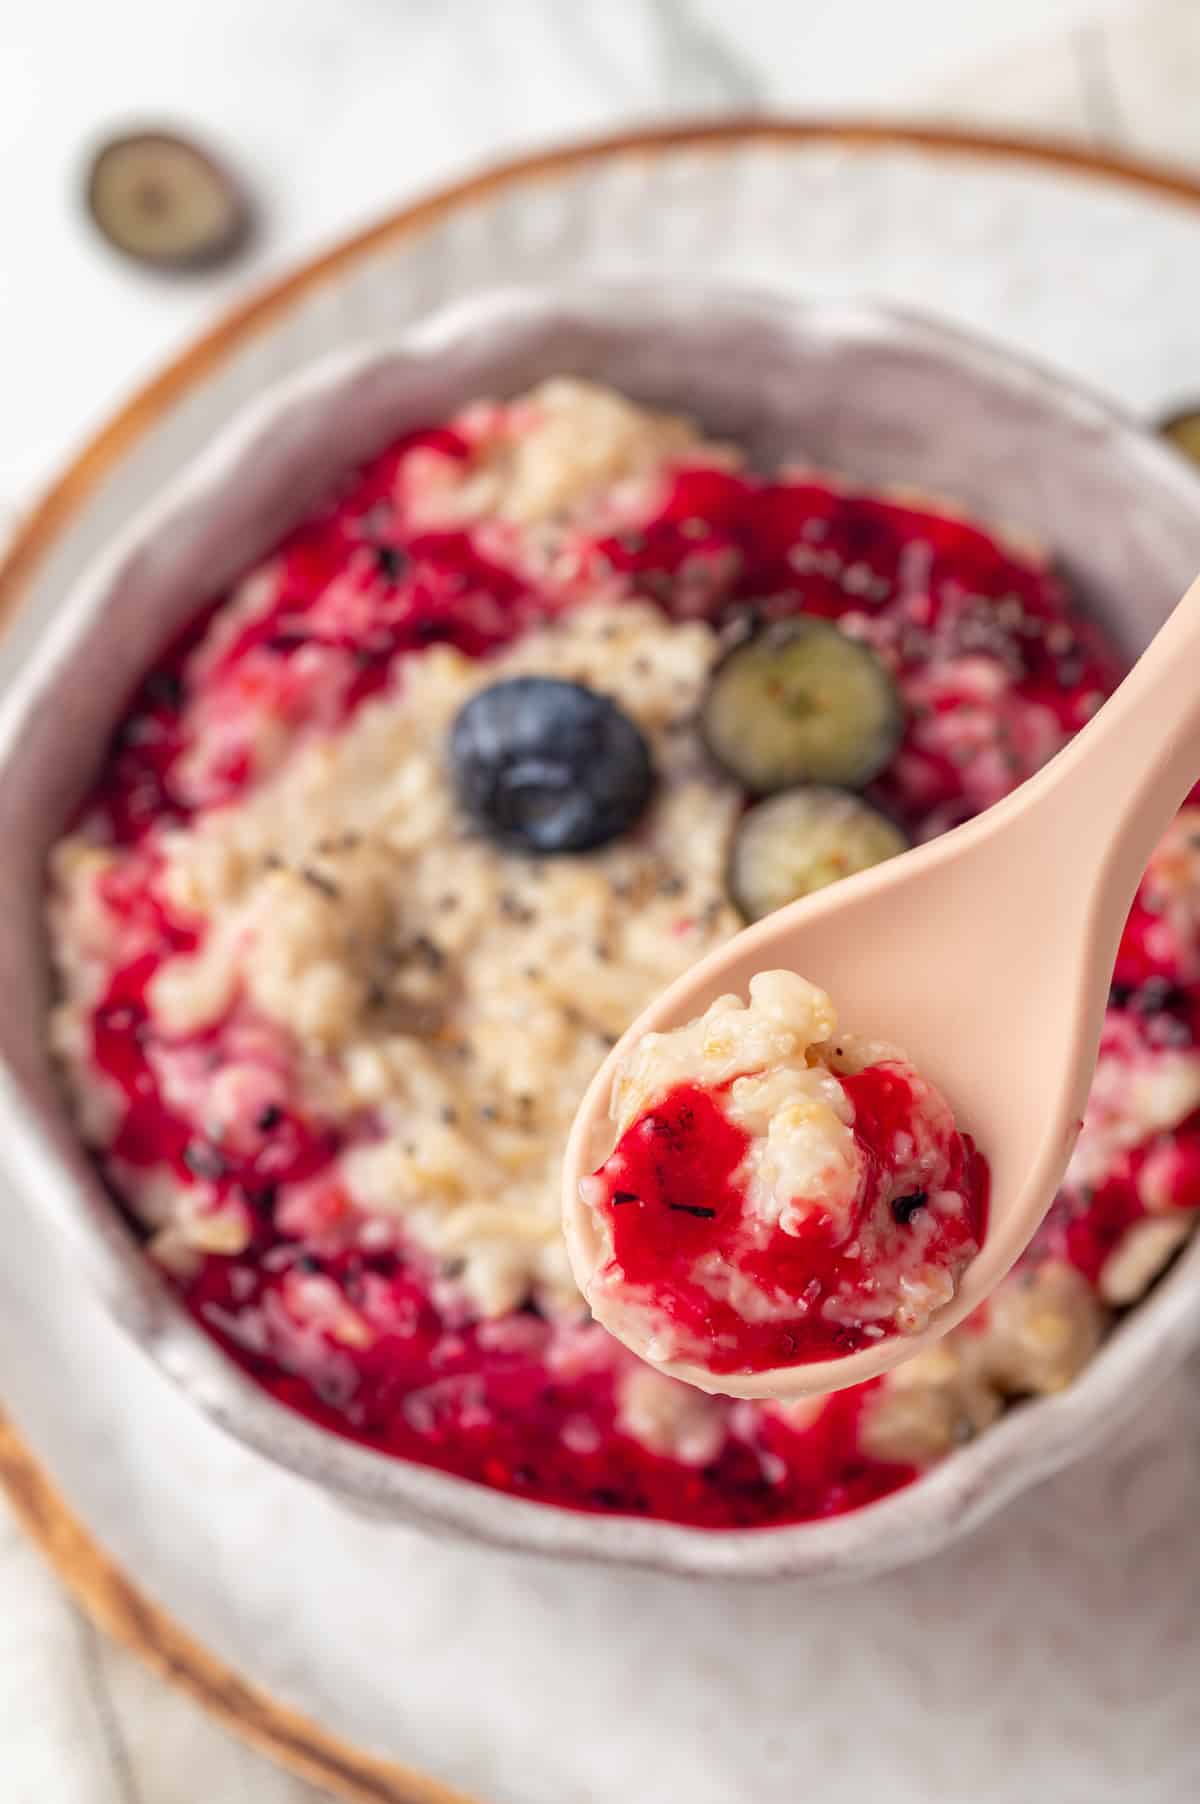 Spoonful of baby oatmeal with jam